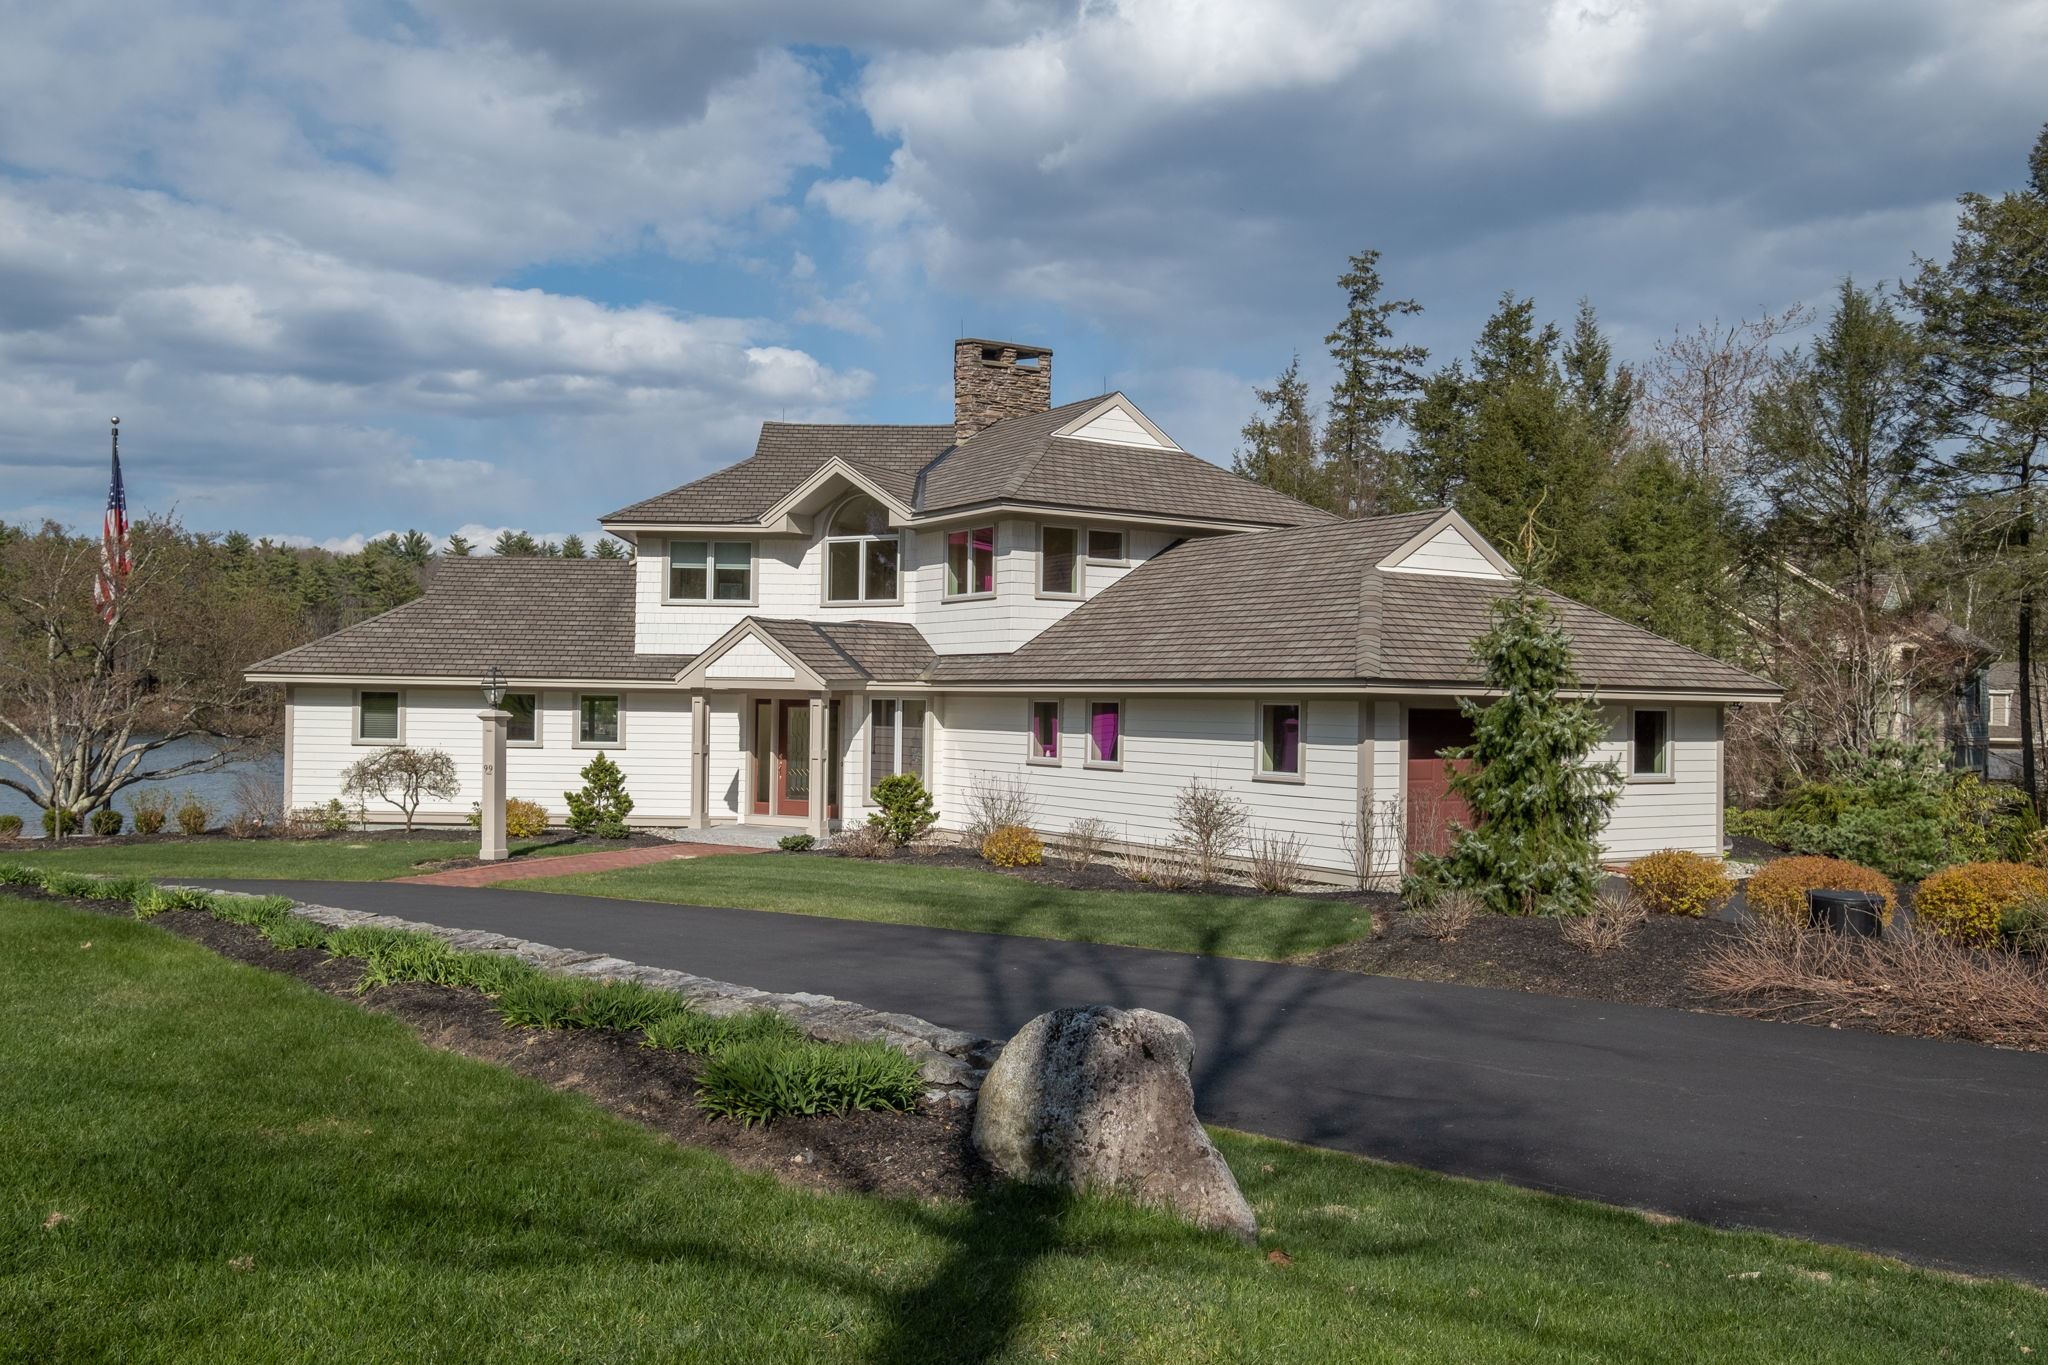  99 Springfield Point Rd, Wolfeboro, NH 03894, US